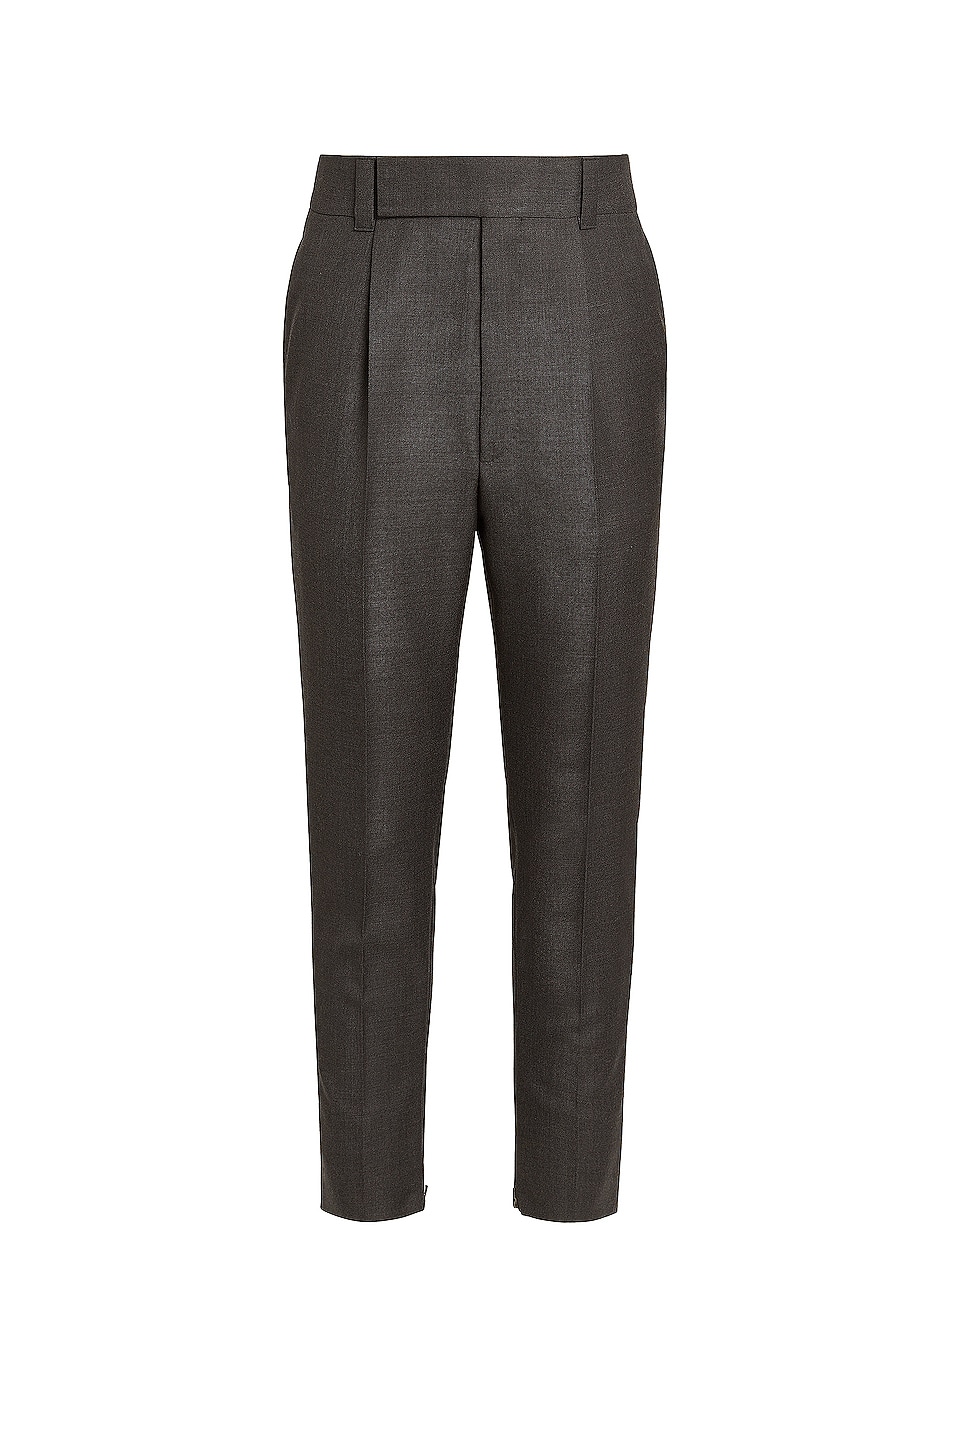 Image 1 of Fear of God Exclusively for Ermenegildo Zegna Single Pleat Trousers in Anthracite